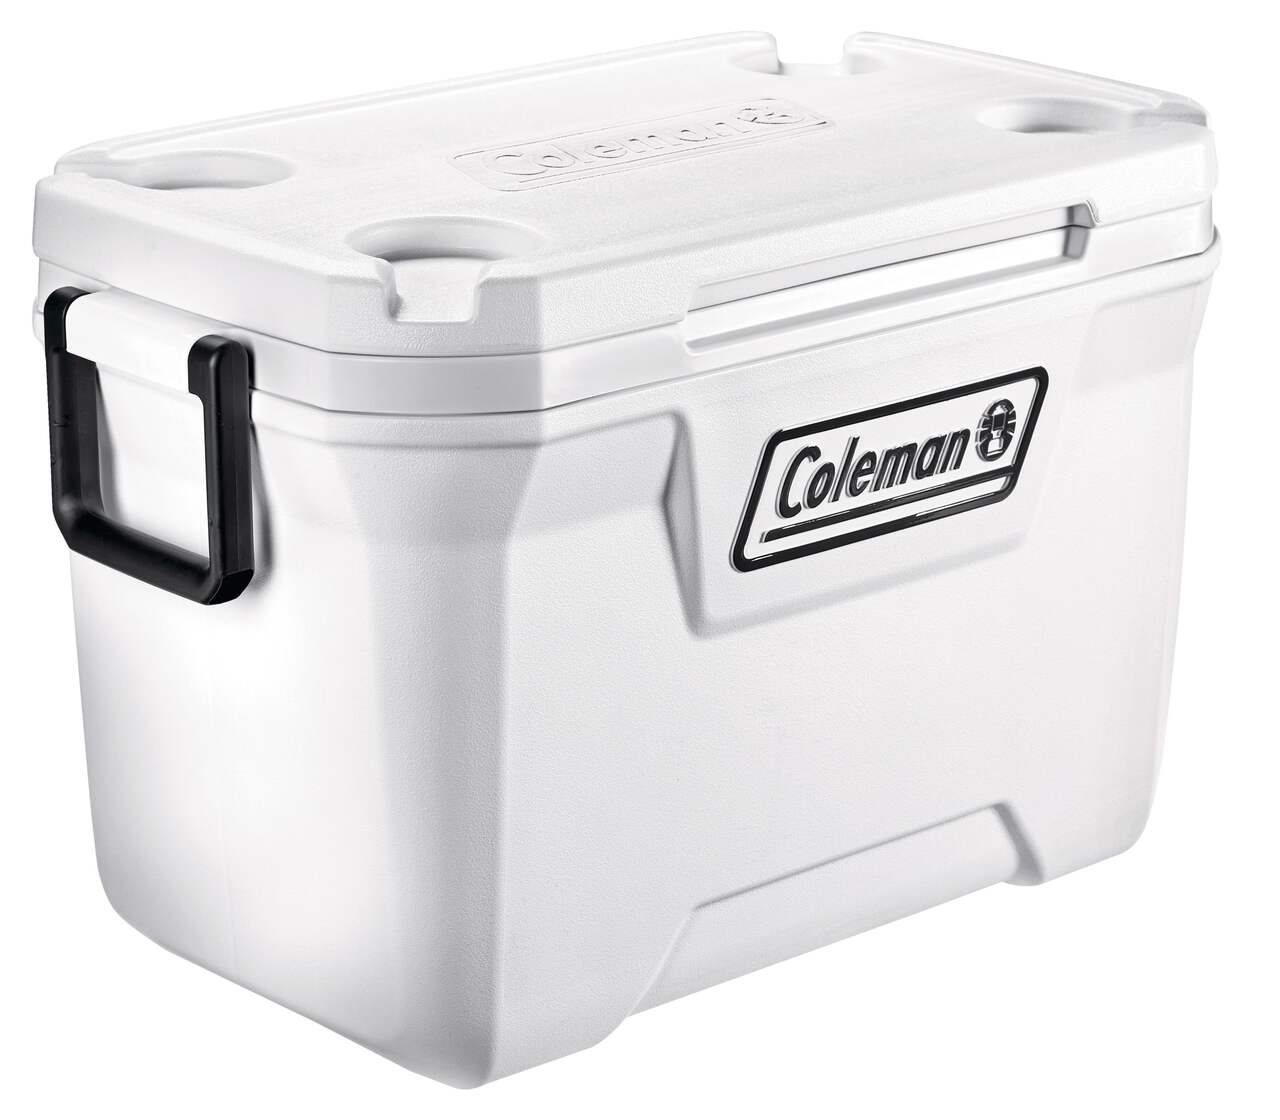 https://media-www.canadiantire.ca/product/playing/camping/hydration-coolers/0854255/coleman-52qt-marine-hard-cooler-16559f39-9c00-44c0-ad43-0674620b8e8c-jpgrendition.jpg?imdensity=1&imwidth=1244&impolicy=mZoom